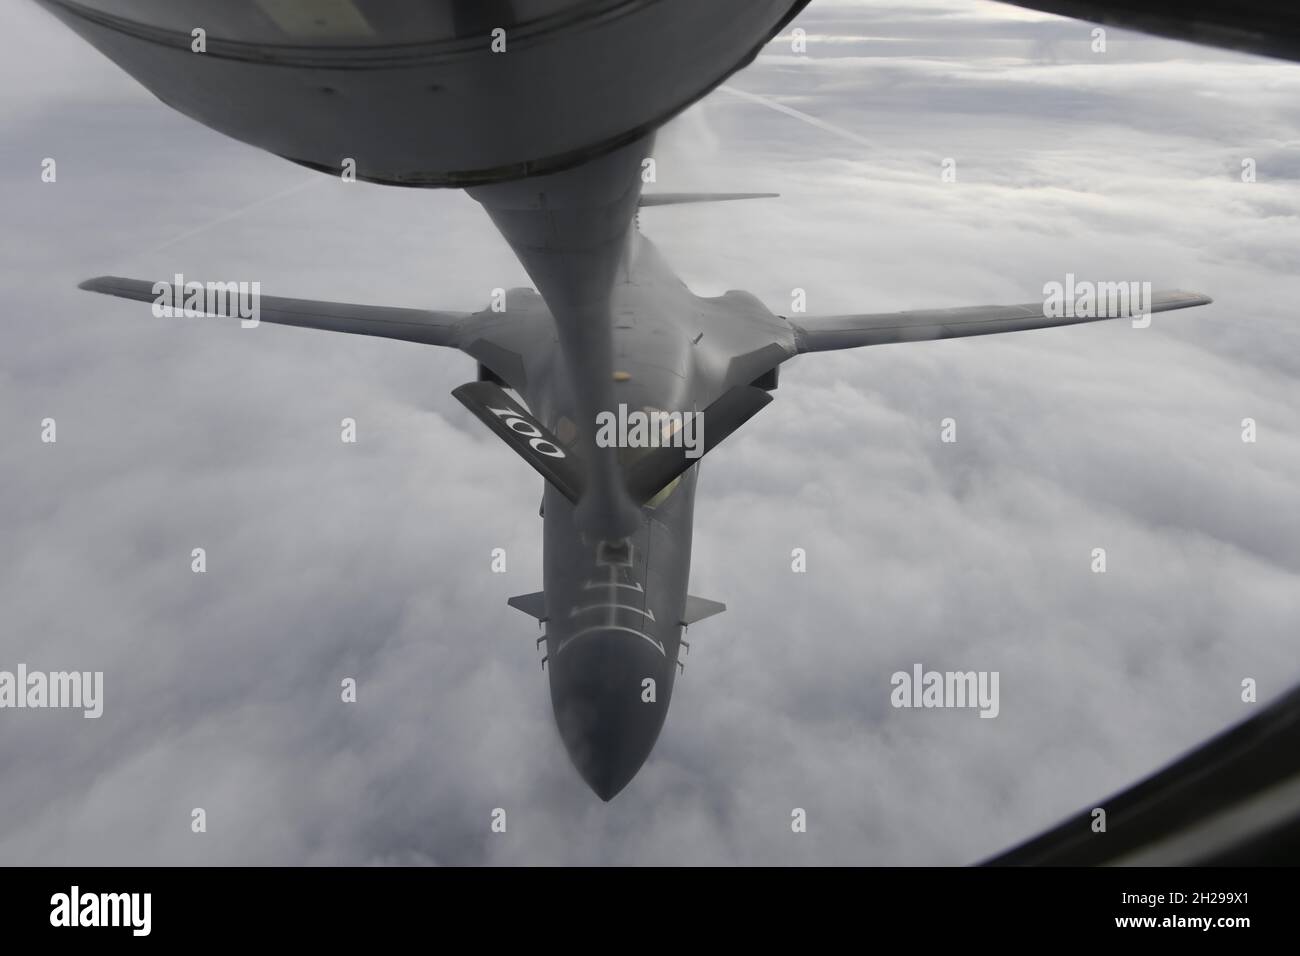 A 9th Expeditionary Bomb Squadron B-1B Lancer, deployed in support of Bomber Task Force Europe 22-1, receives fuel from a 100th Air Refueling Wing KC-135 Stratotanker enroute to a Black Sea maritime targeting training mission, Oct. 19, 2021. The Bomber Task Force Europe mission series requires a joint and coalition force to support strategic bomber deployments within the European theater, which amplifies readiness and promotes interoperability between rotational bomber aircrew, NATO allies, and coalition partners. Stock Photo